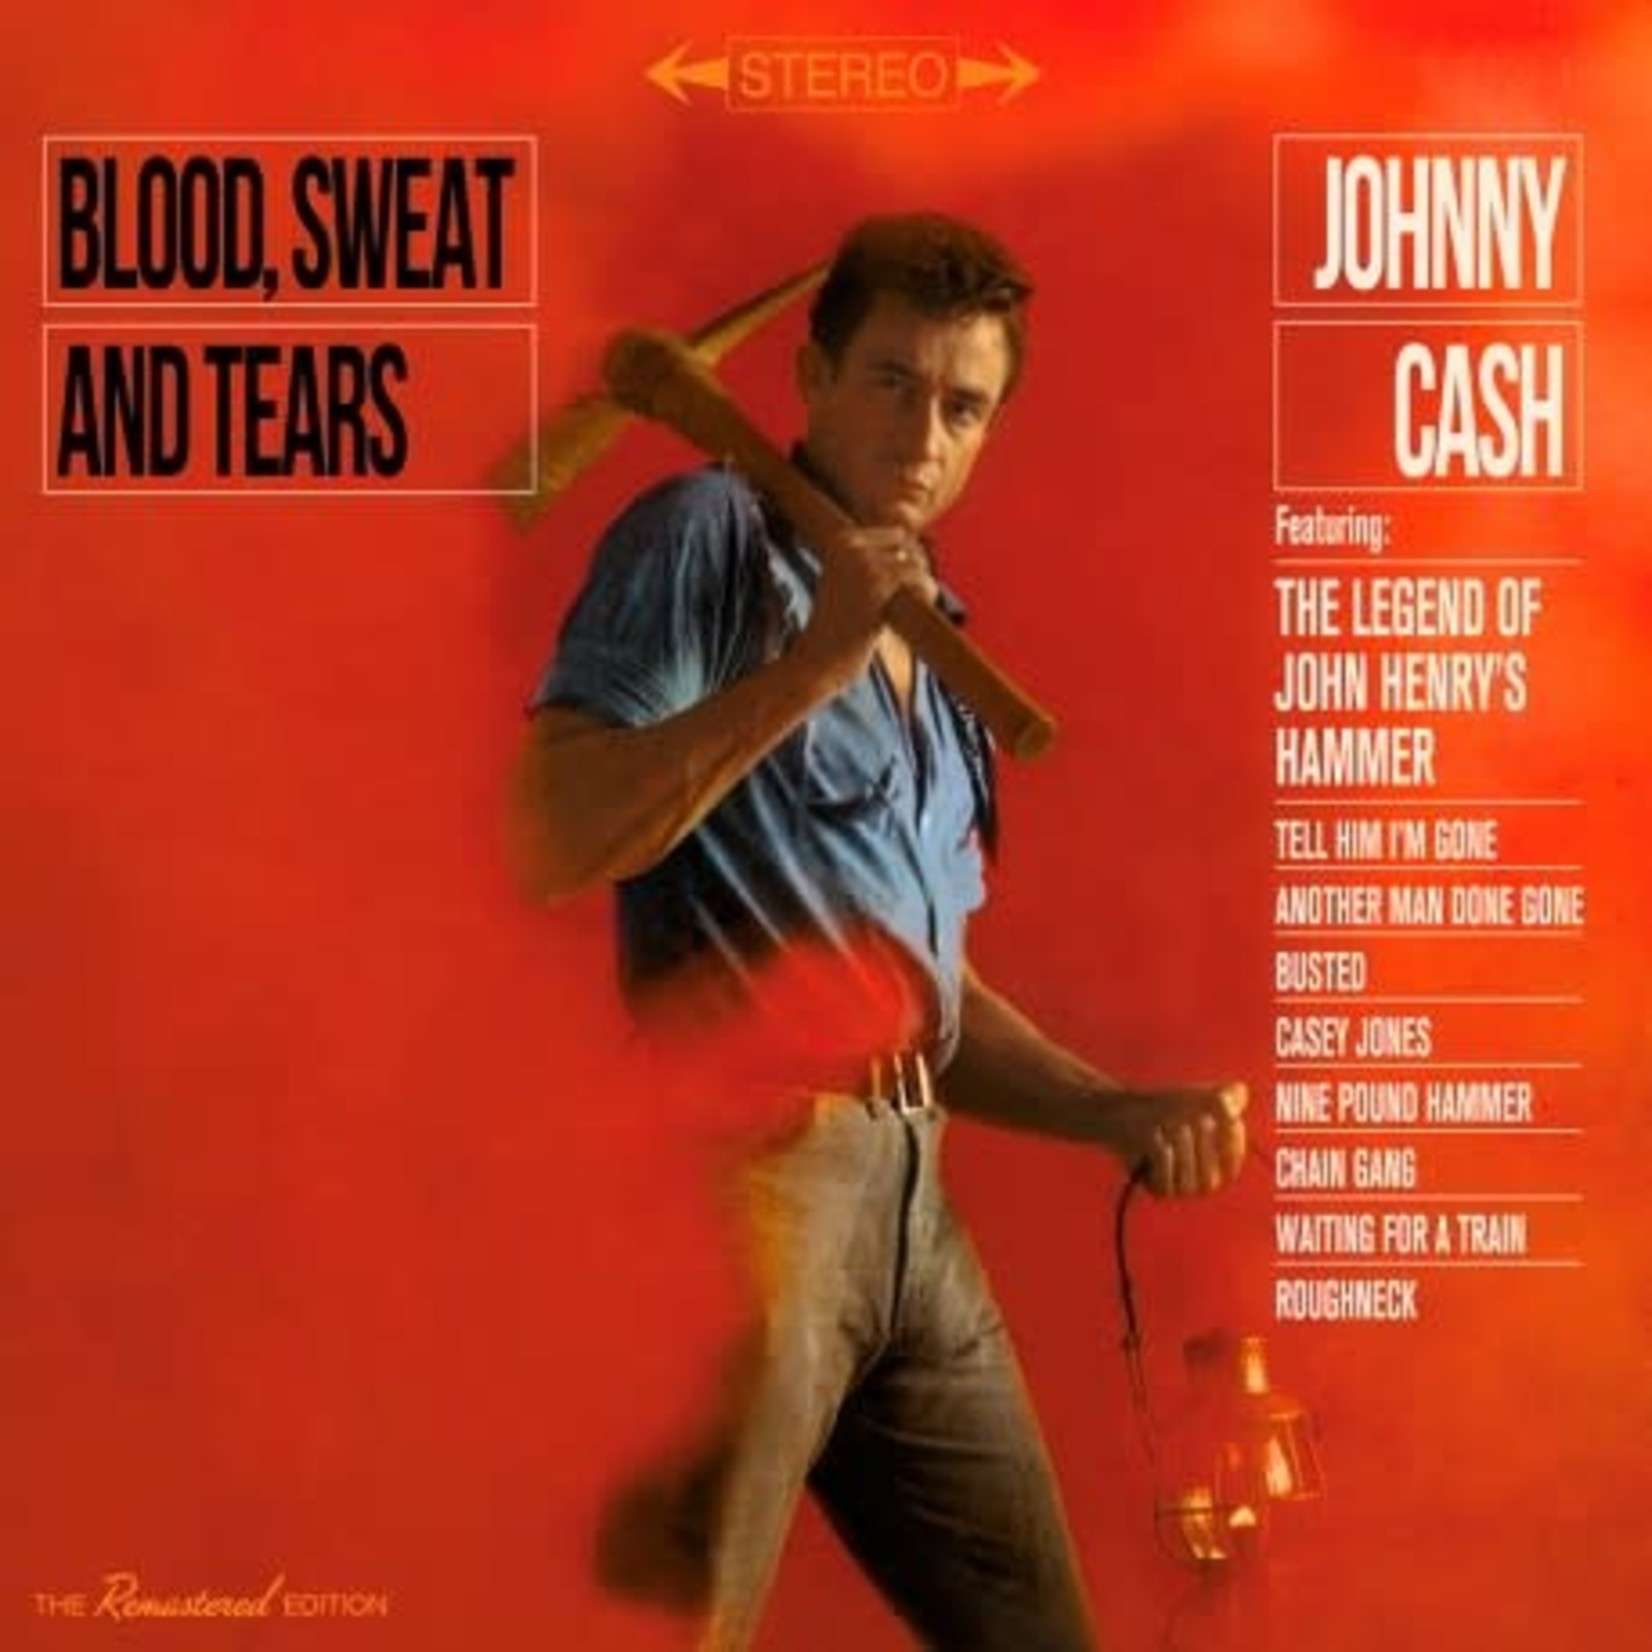 [Discontinued] Johnny Cash - Blood, Sweat And Tears